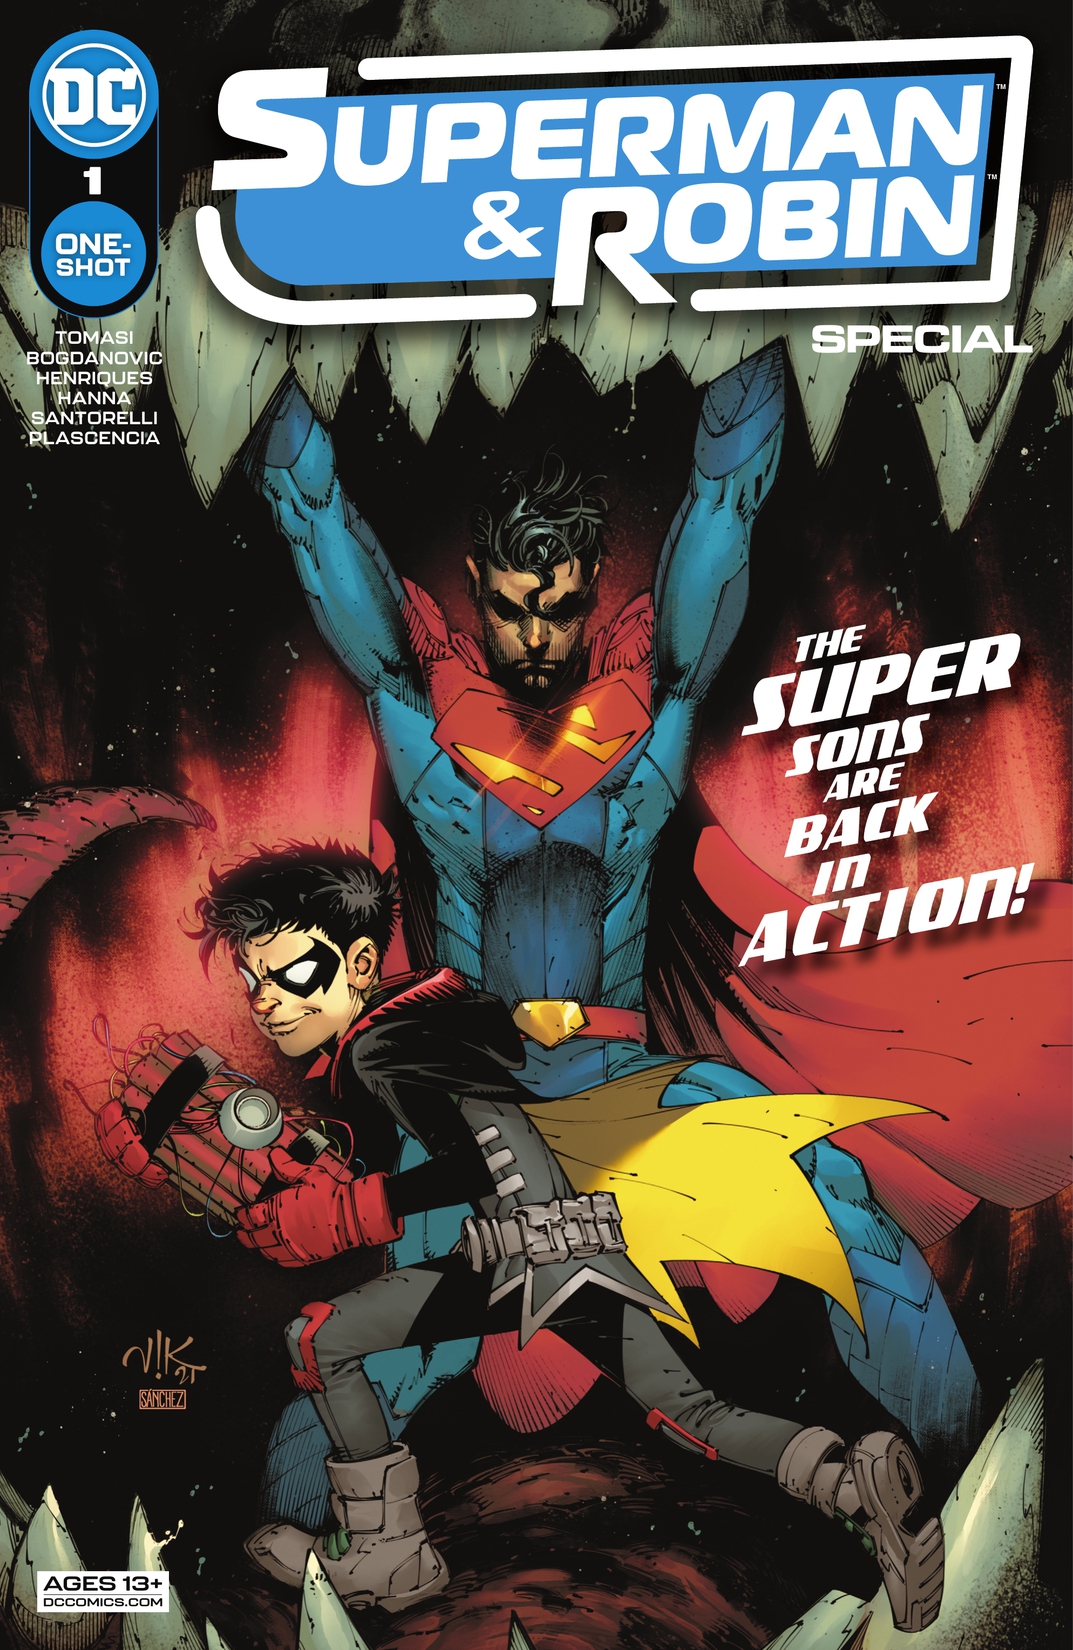 Superman & Robin Special (2022) #1 preview images